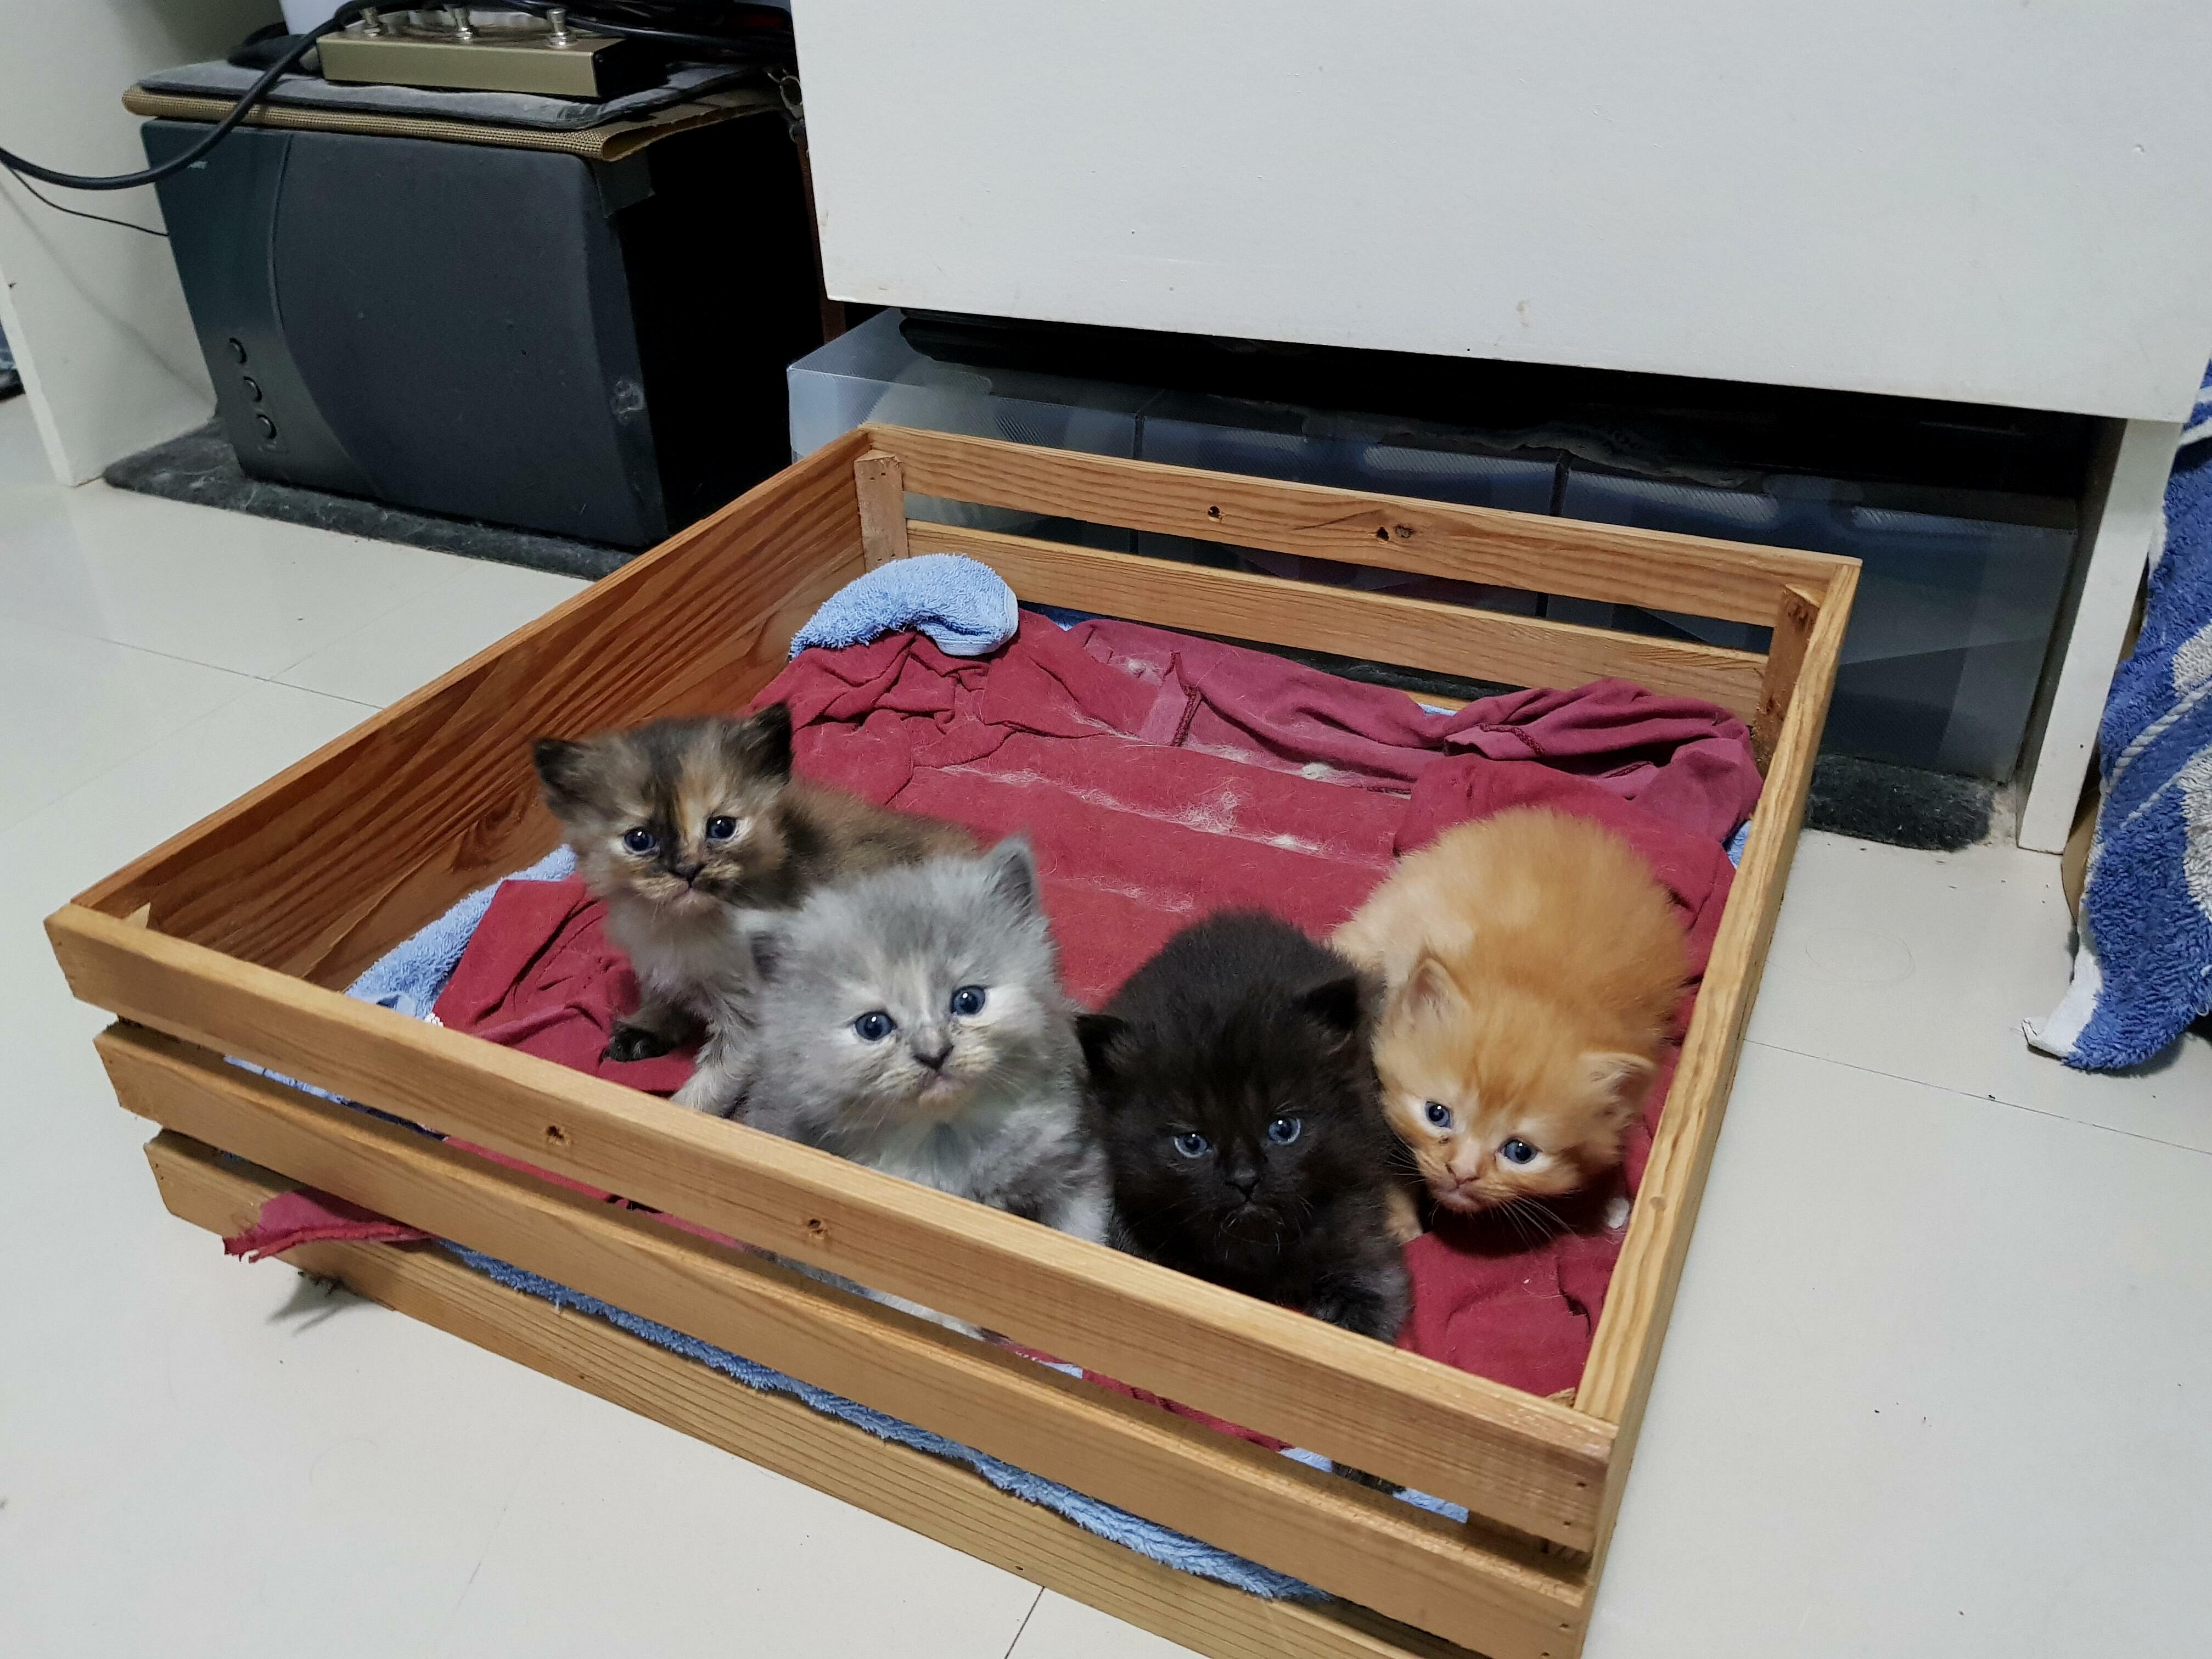 Taken when they were 3 weeks old. adorable kittens! @ @